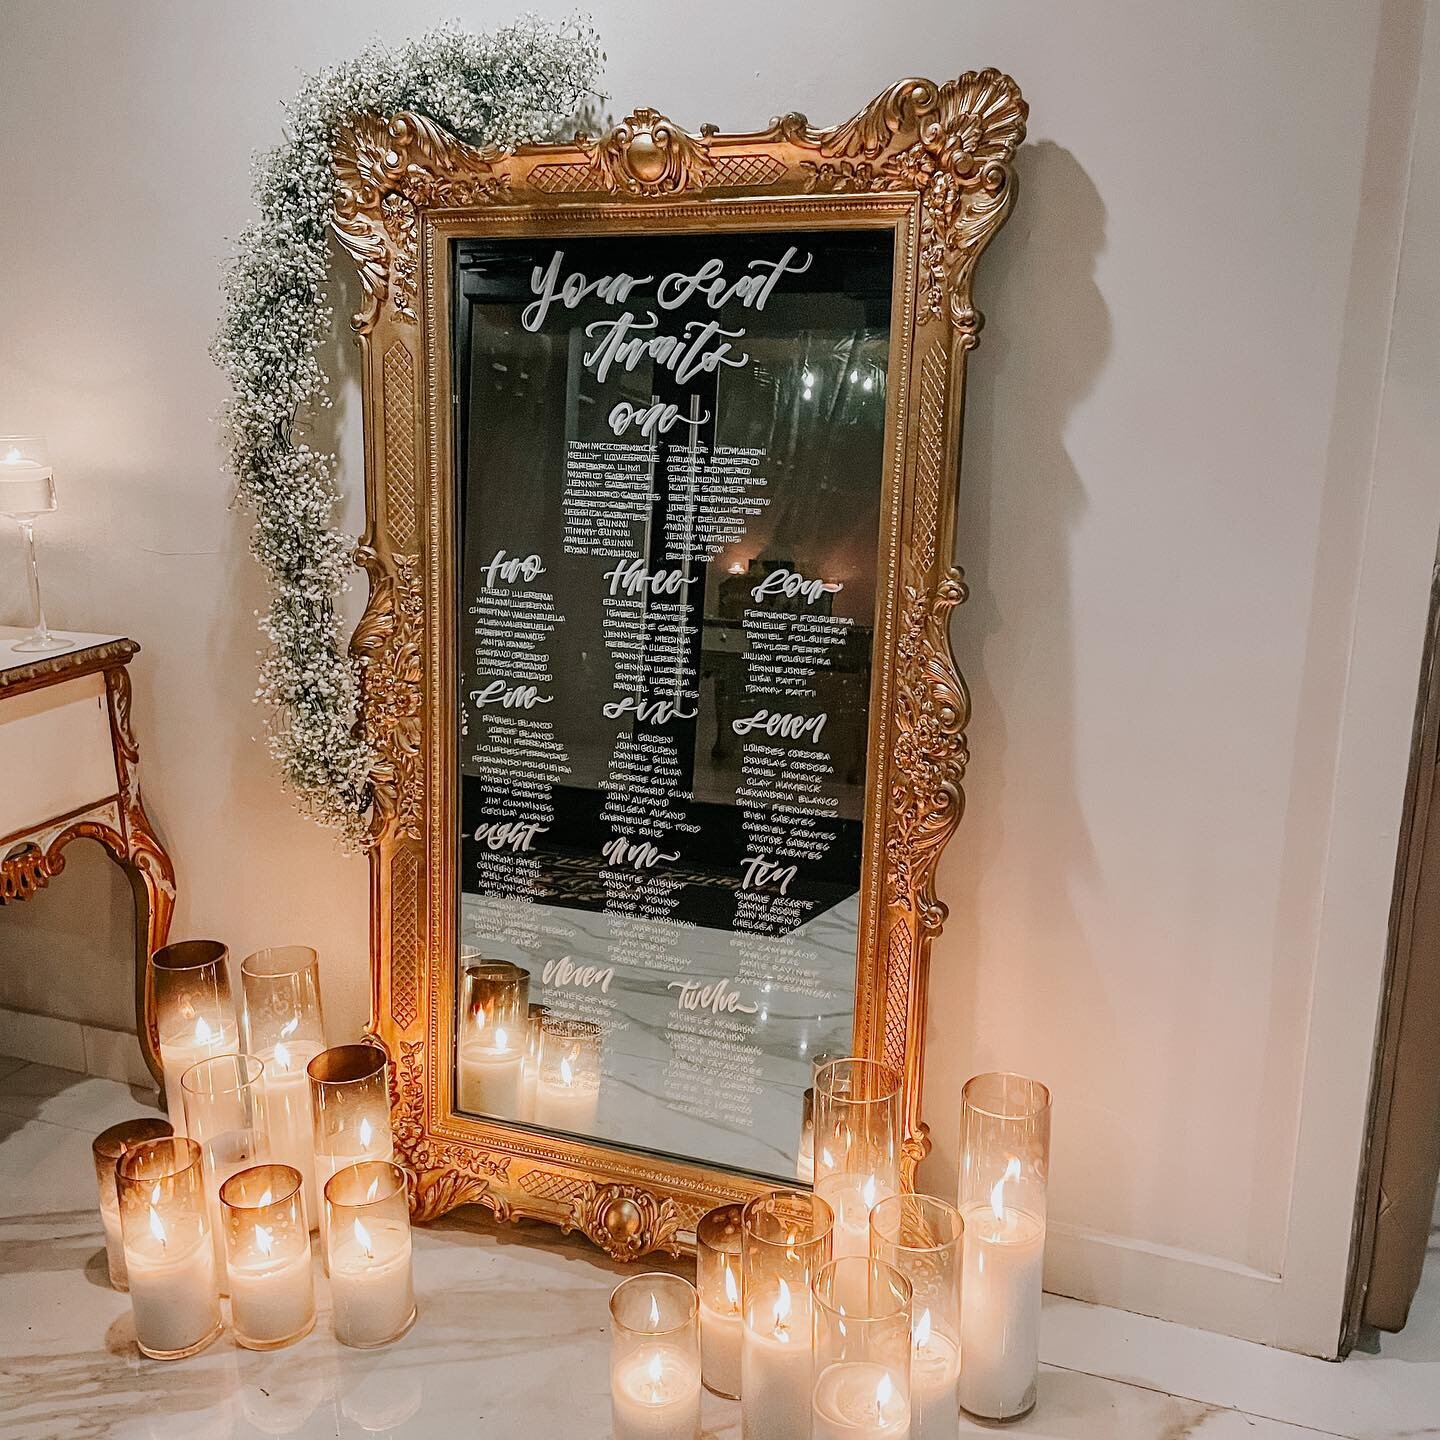 a touch of enchantment 🕯️🤎✨
Creating beautiful memories, one sign at a time. #WeddingSignage #handcraftedelegance